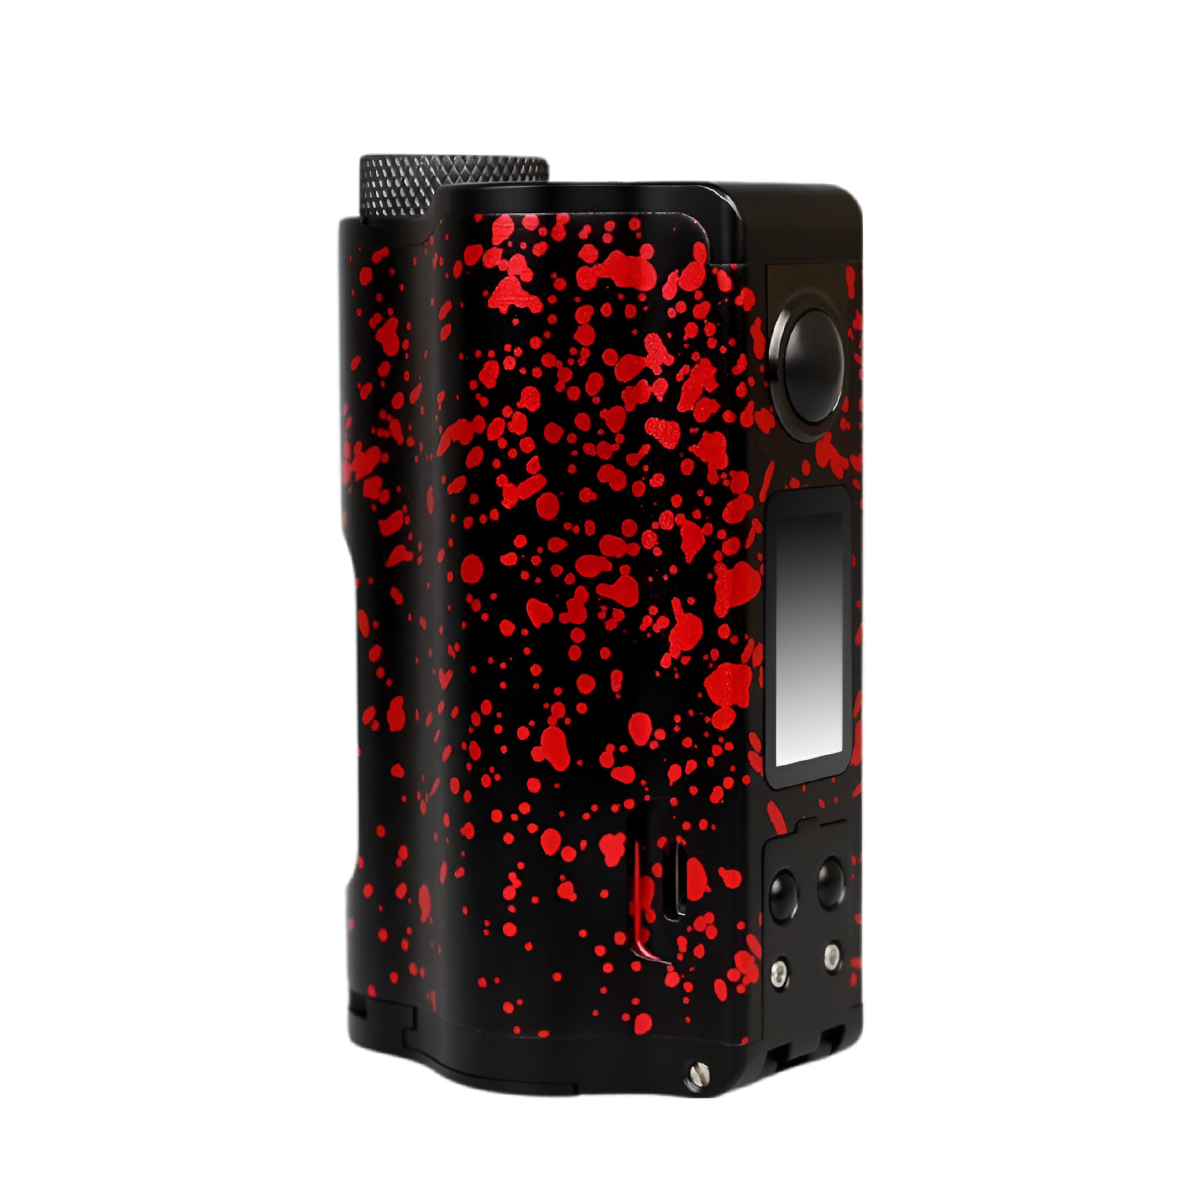 Dovpo Topside Dual 200W Squonk Special Edition Box-Mod Kit Se Black Red  